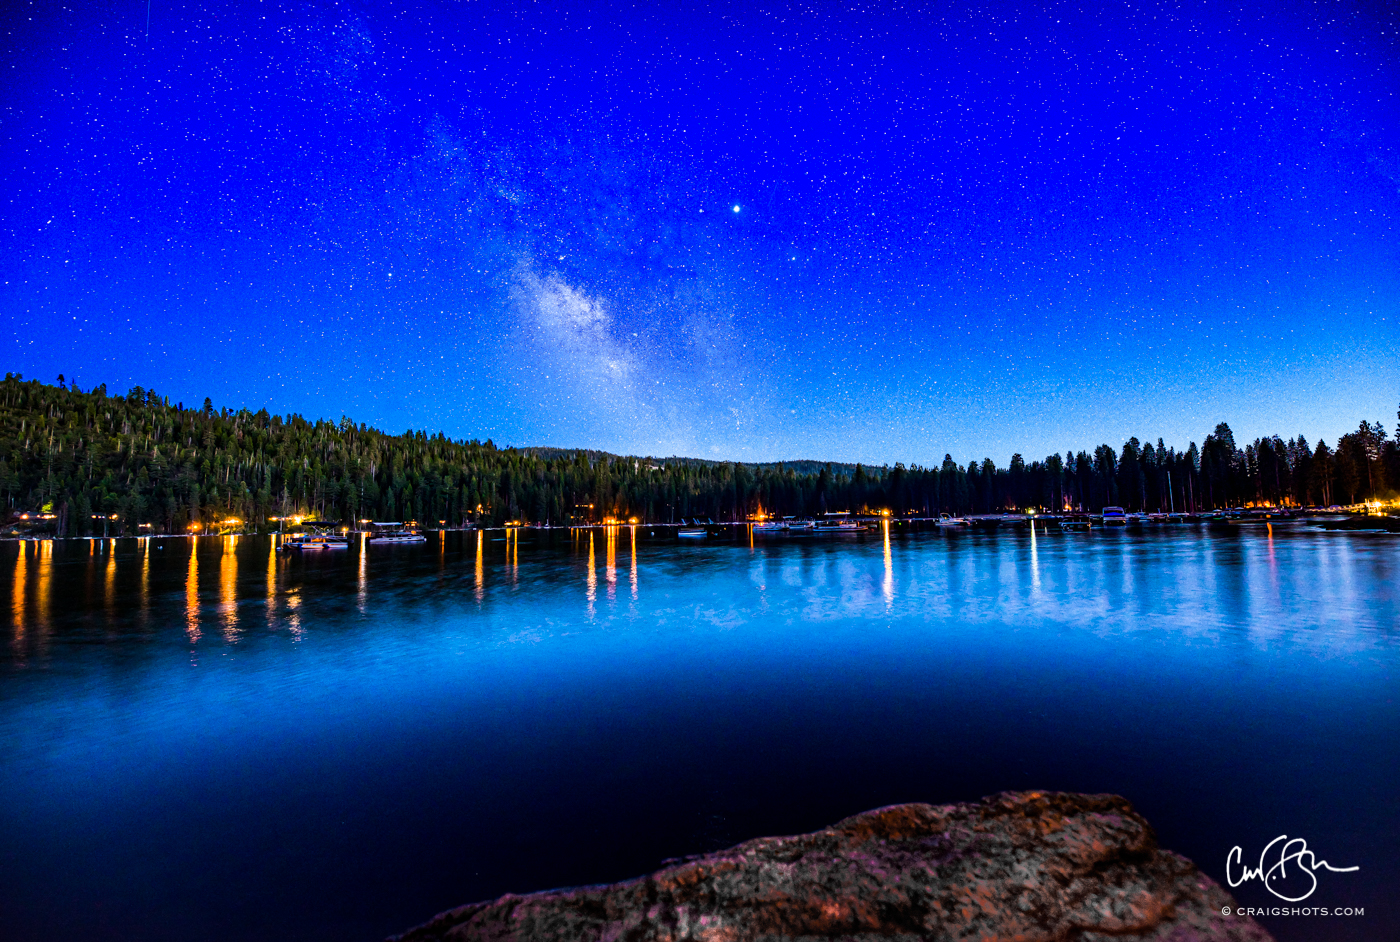 Aug 1: Milky Way at Blue Hour, Pinecrest Lake, CA